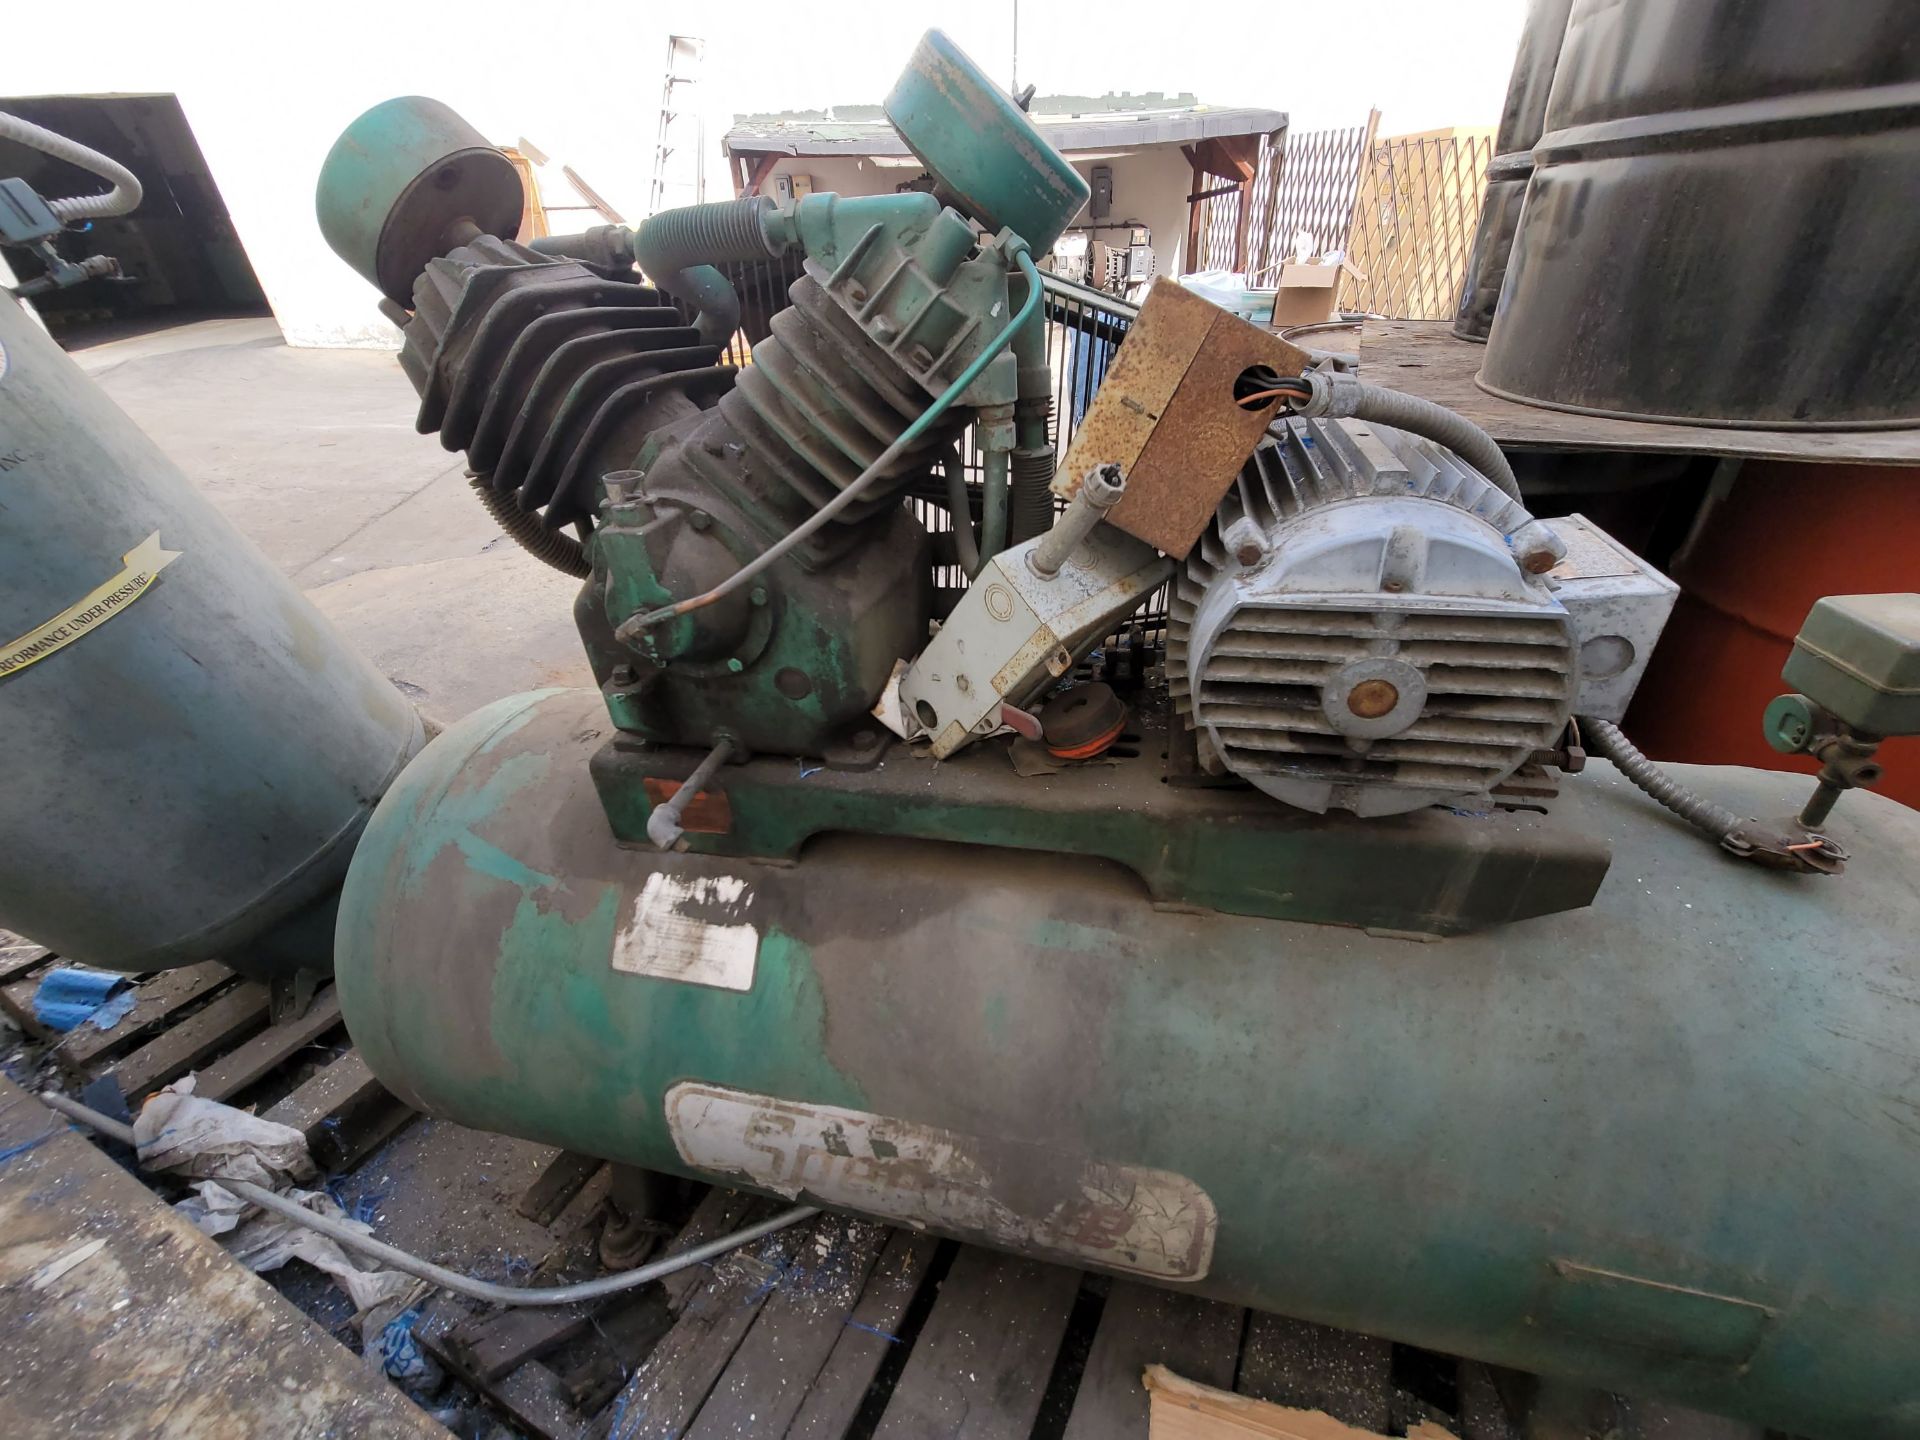 SPEEDAIRE AIR COMPRESSOR, 10 HP, MODEL 32497, 2-STAGE, OUT OF SERVICE / NEEDS WORK - Image 2 of 2